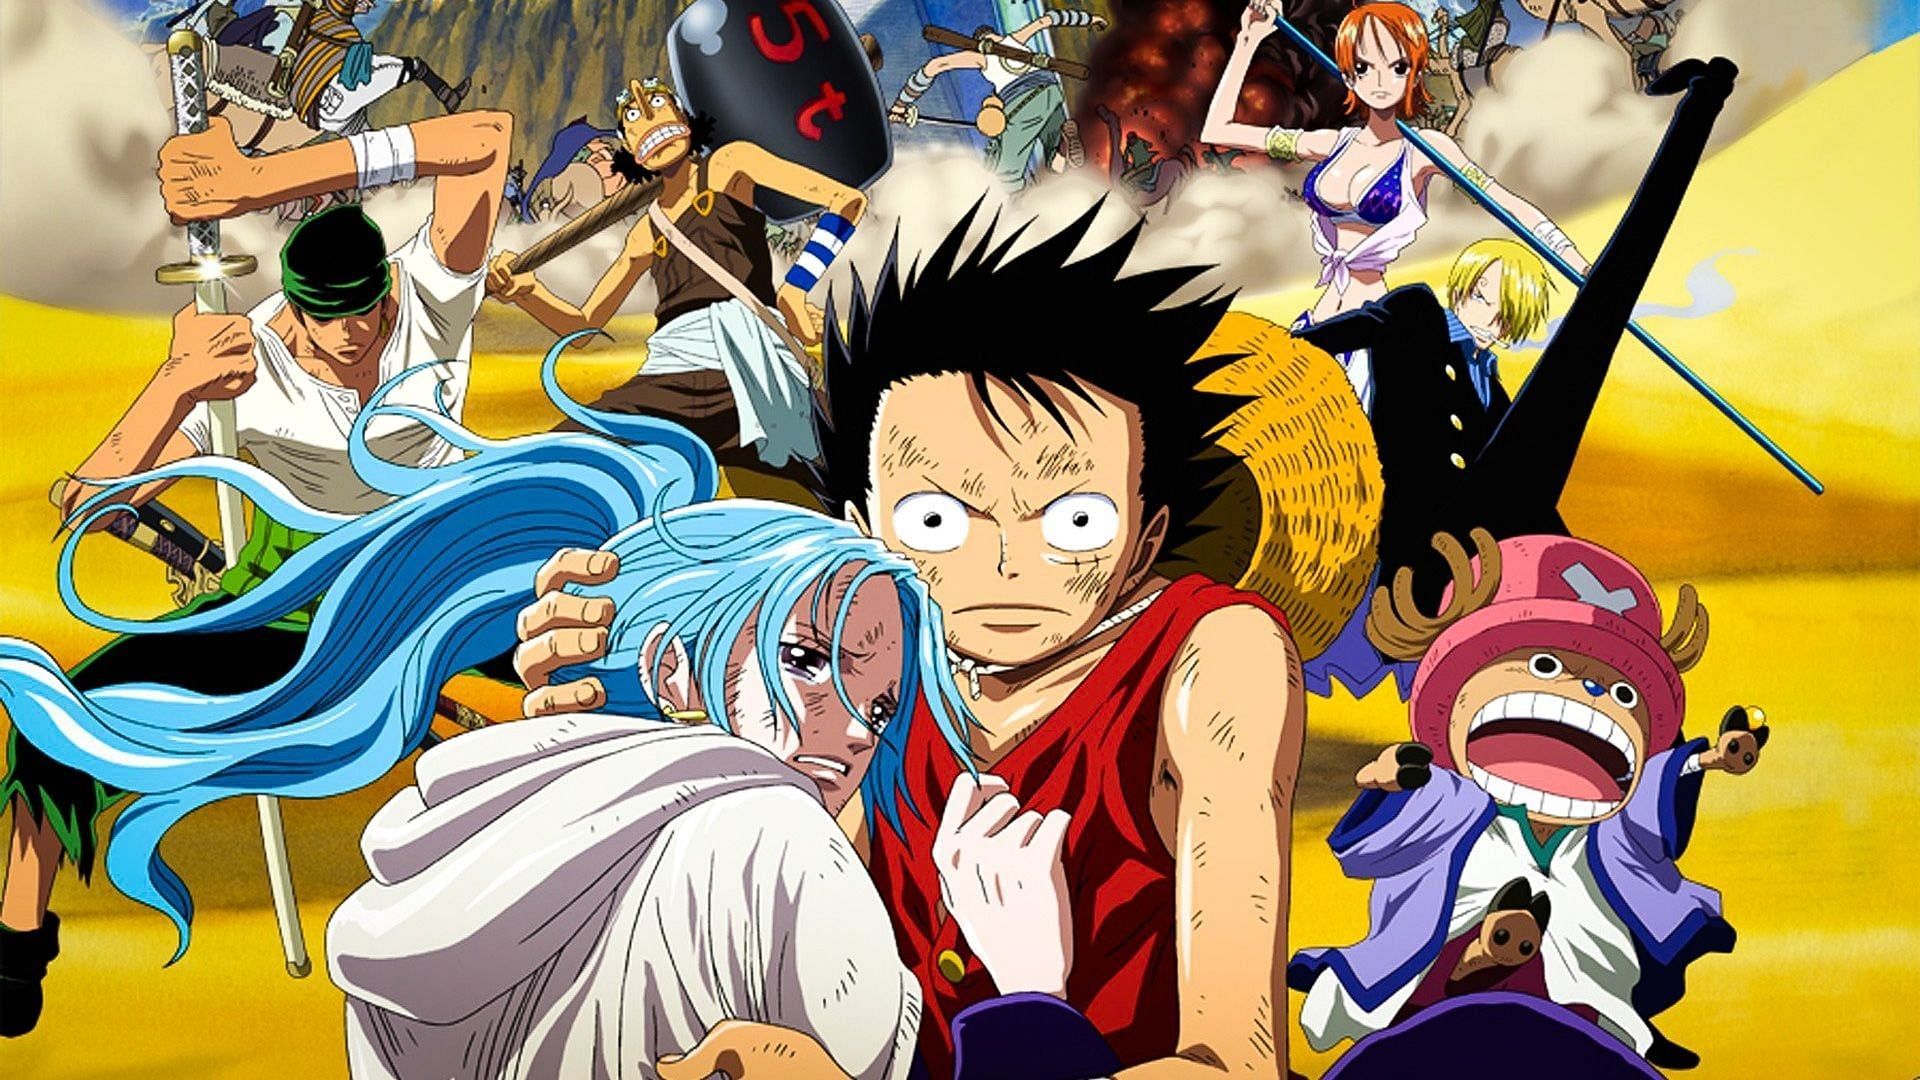 The Straw Hats as seen in Episode of Arabasta (Image via Toei Animation, One Piece)